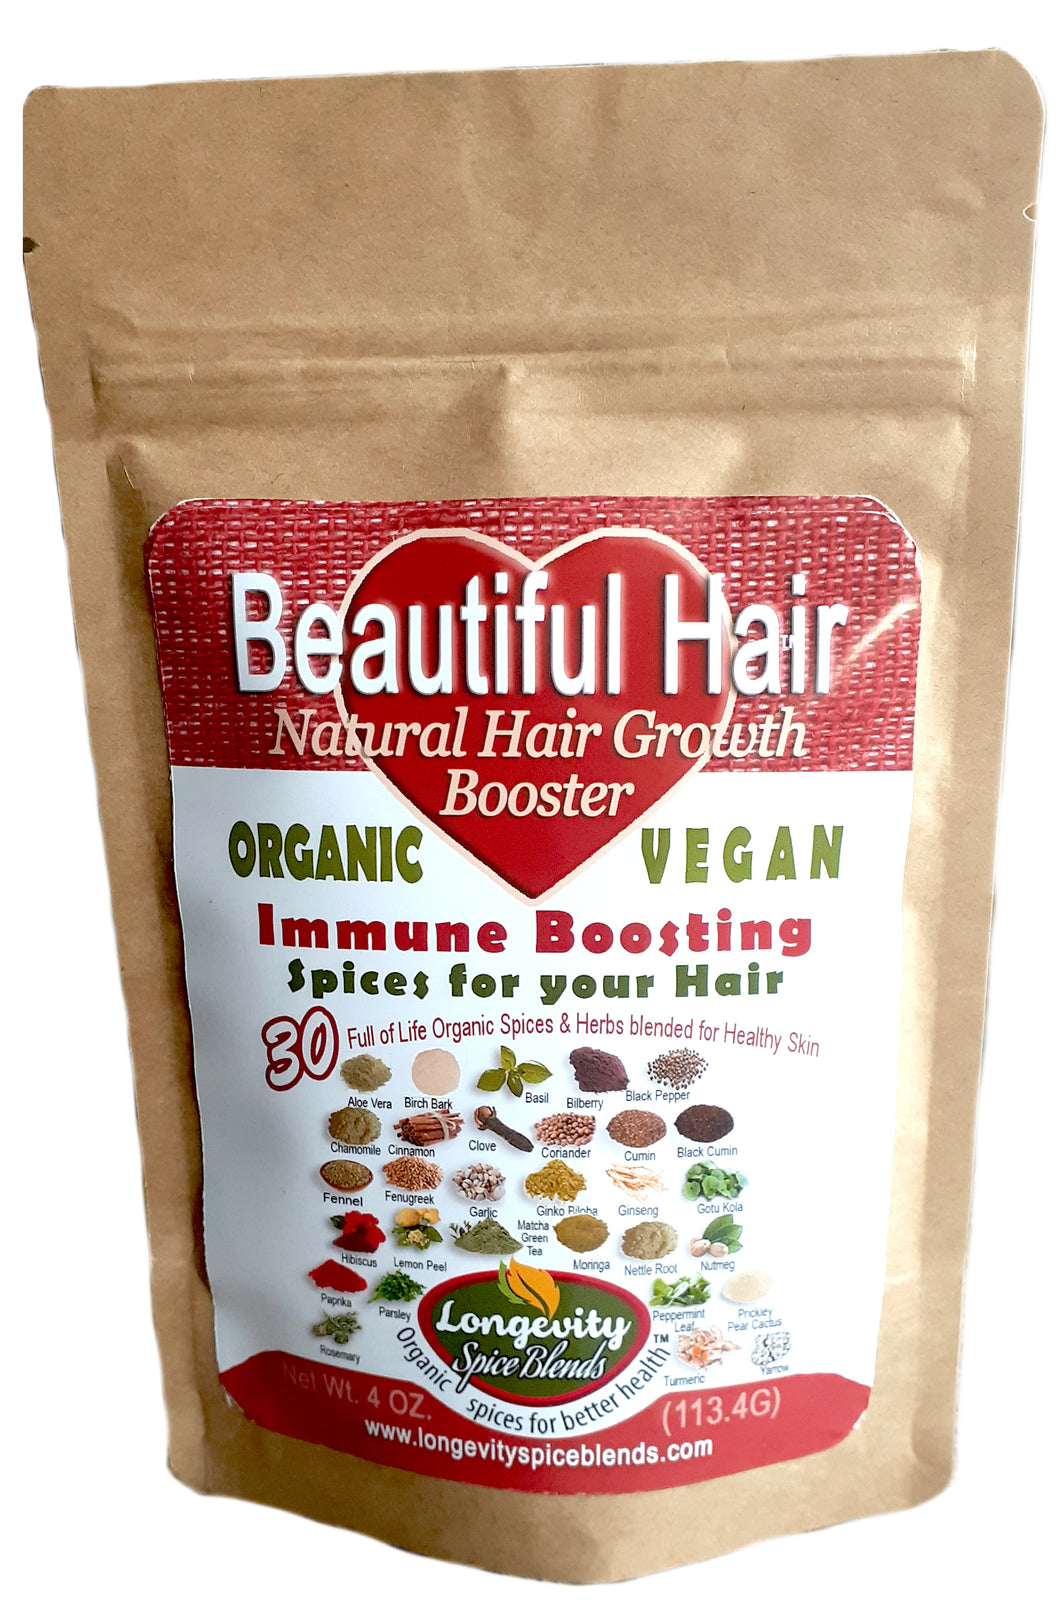 Hair - Beautiful Hair Spices …help for Natural Beautiful Hair, Healthy Hair, Natural Vitamins not only for Hair Growth, but Dandruff and Scalp issues. 30 Organic Spices for Beautiful Hair (4 oz. pouch - 45 tsp. servings)